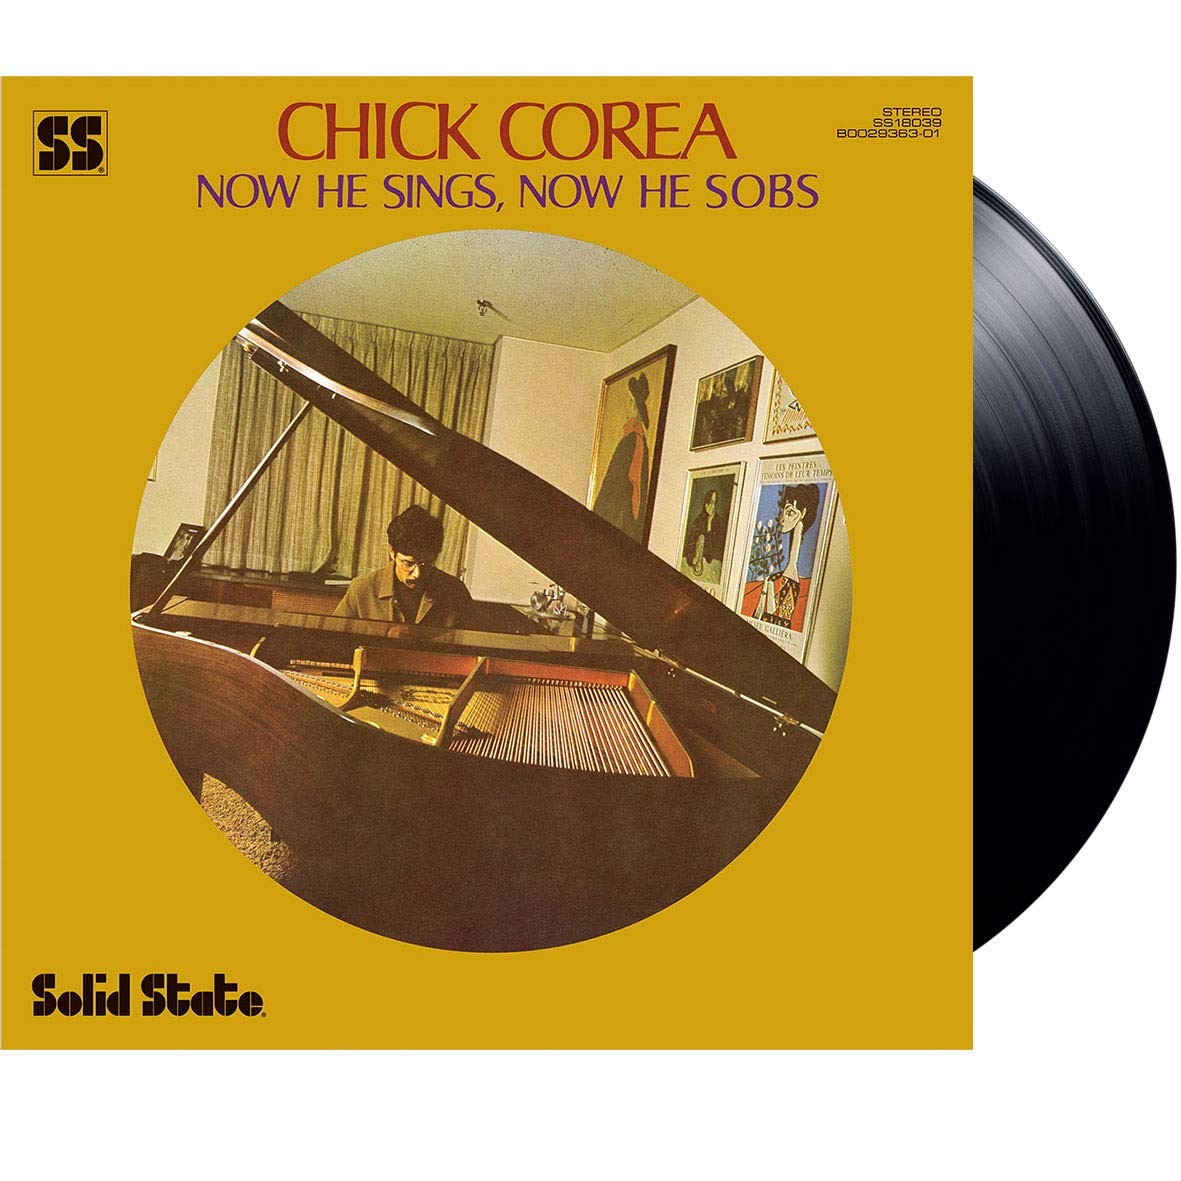 CD Shop - COREA, CHICK NOW HE SINGS, NOW HE SOBS